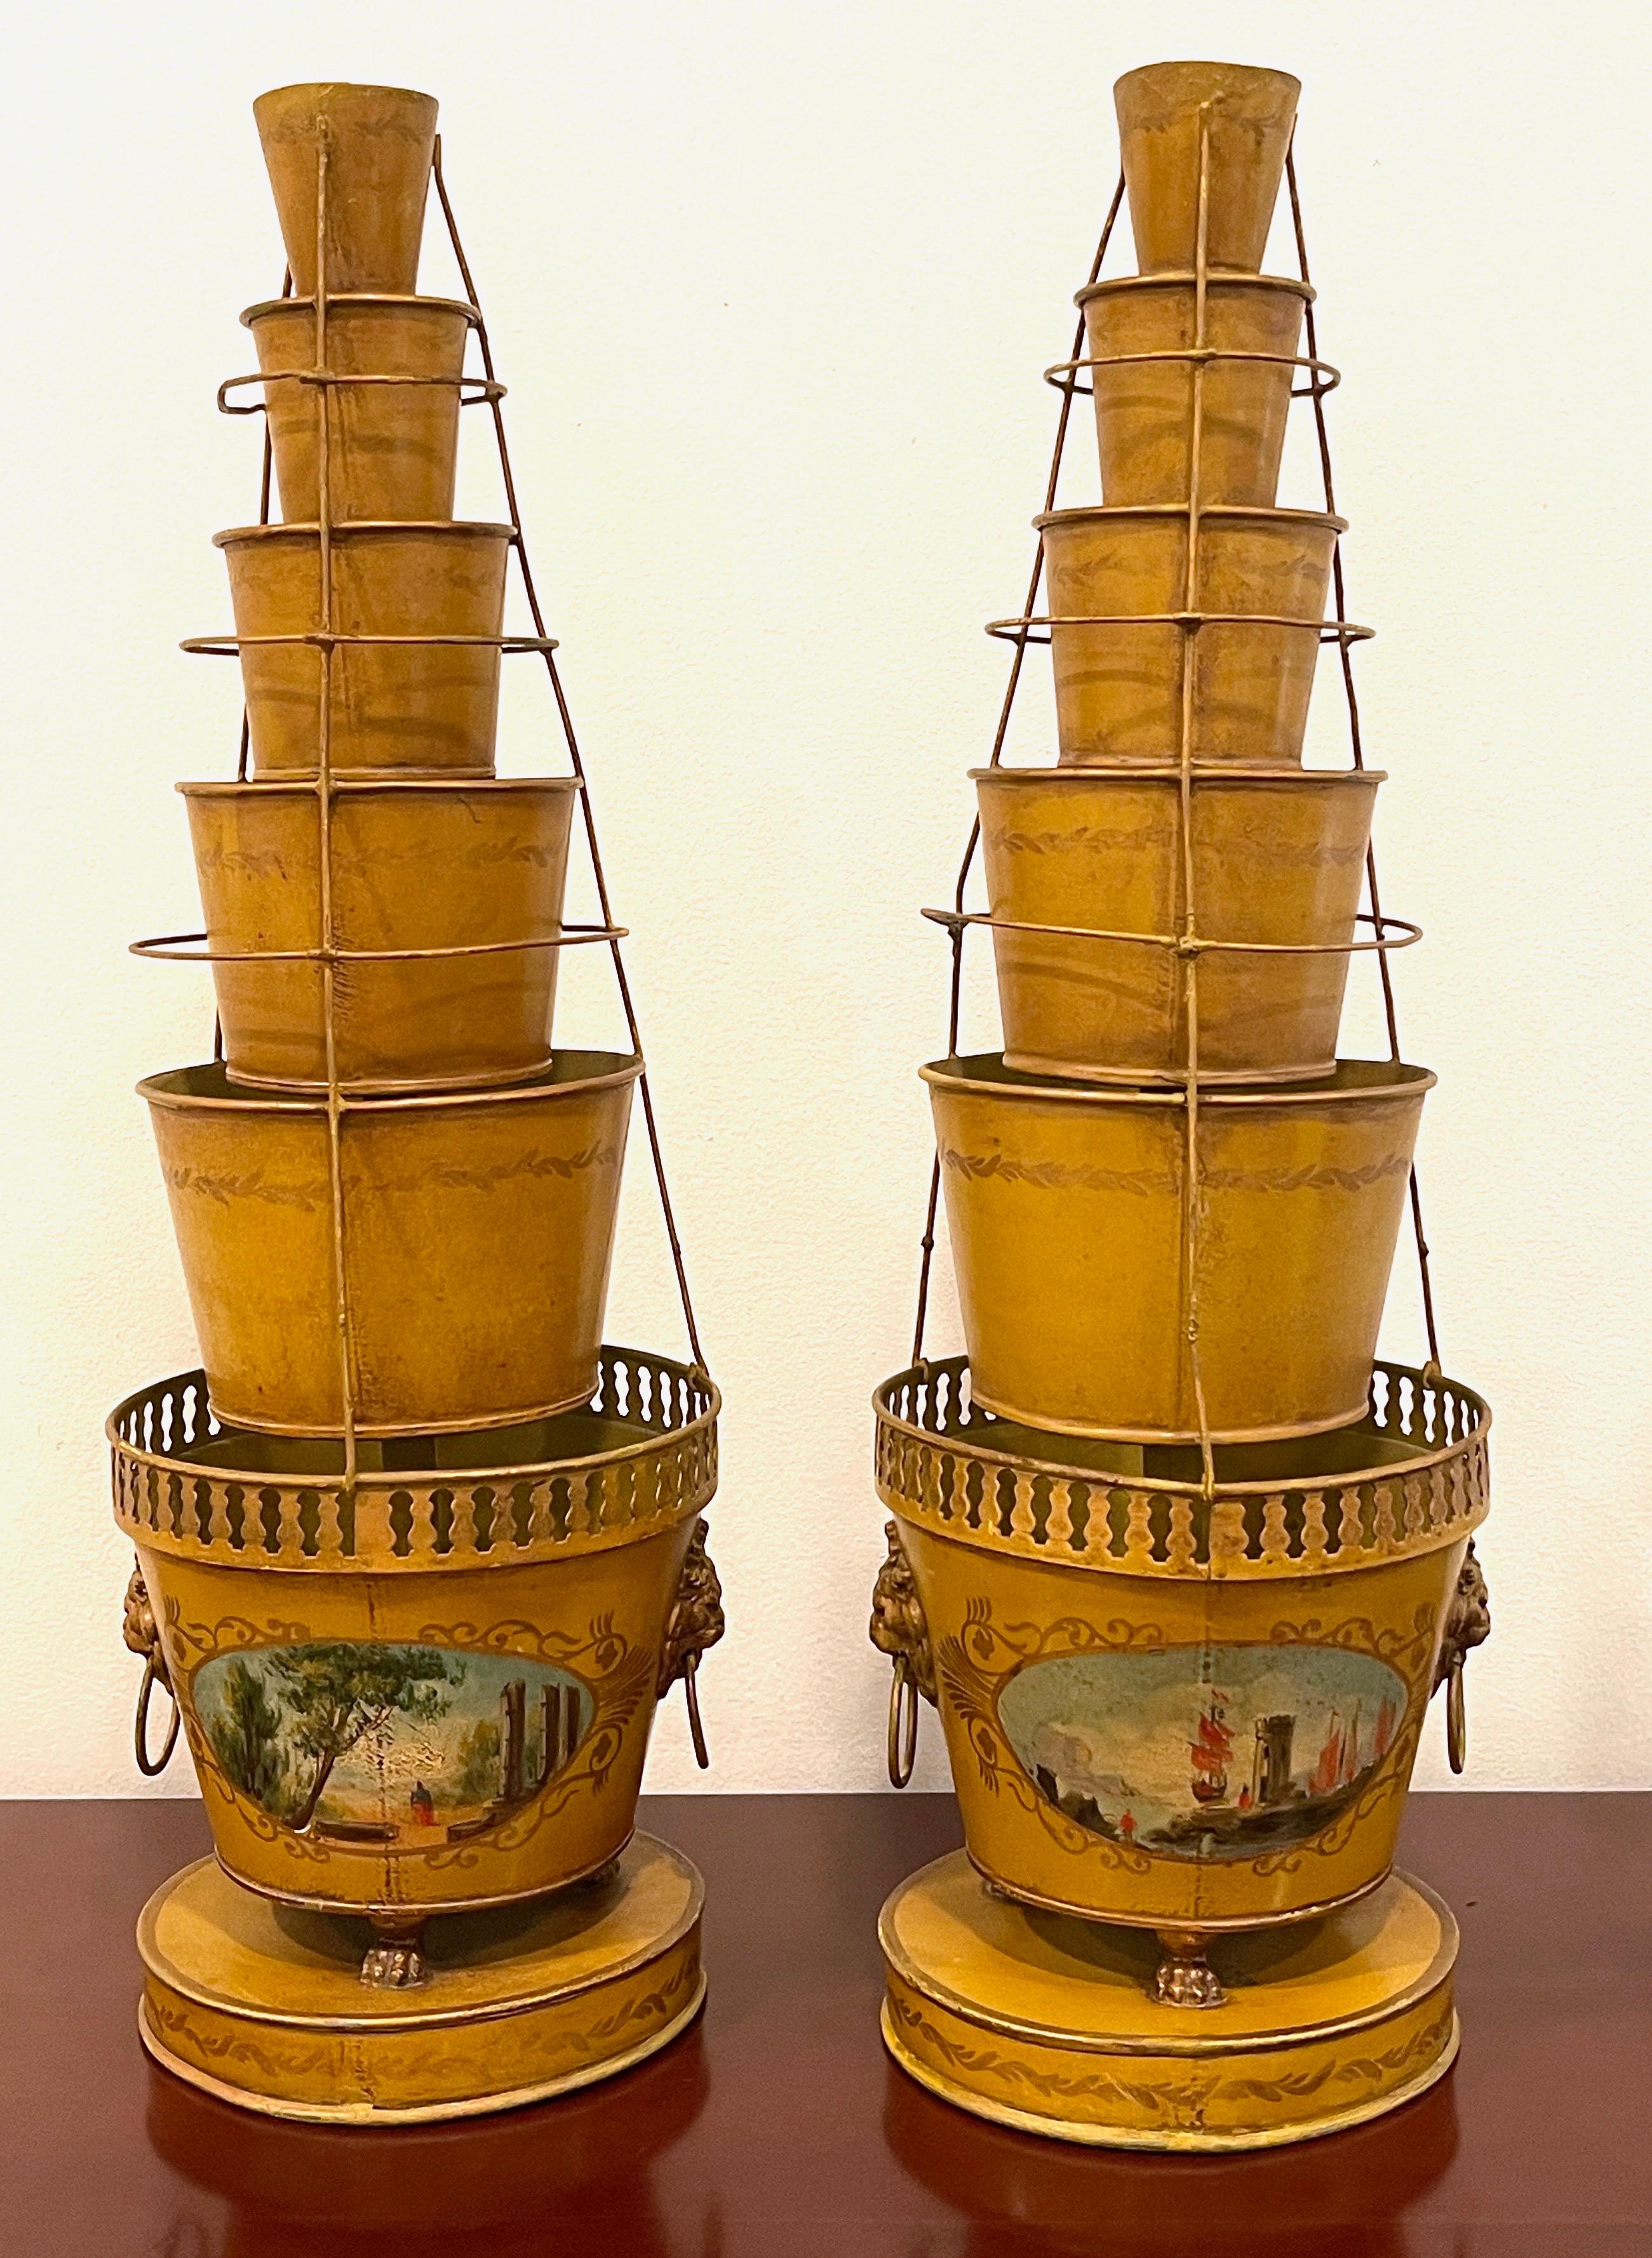 Pair of Antique French Tole Neoclassical Cachepots/Tulipieres
France, Circa 1920

A rare form, each one of obelisk form comprised of six tapering polychromed ochre and gilt background, individual buckets, with wire flower holders. The bottom one